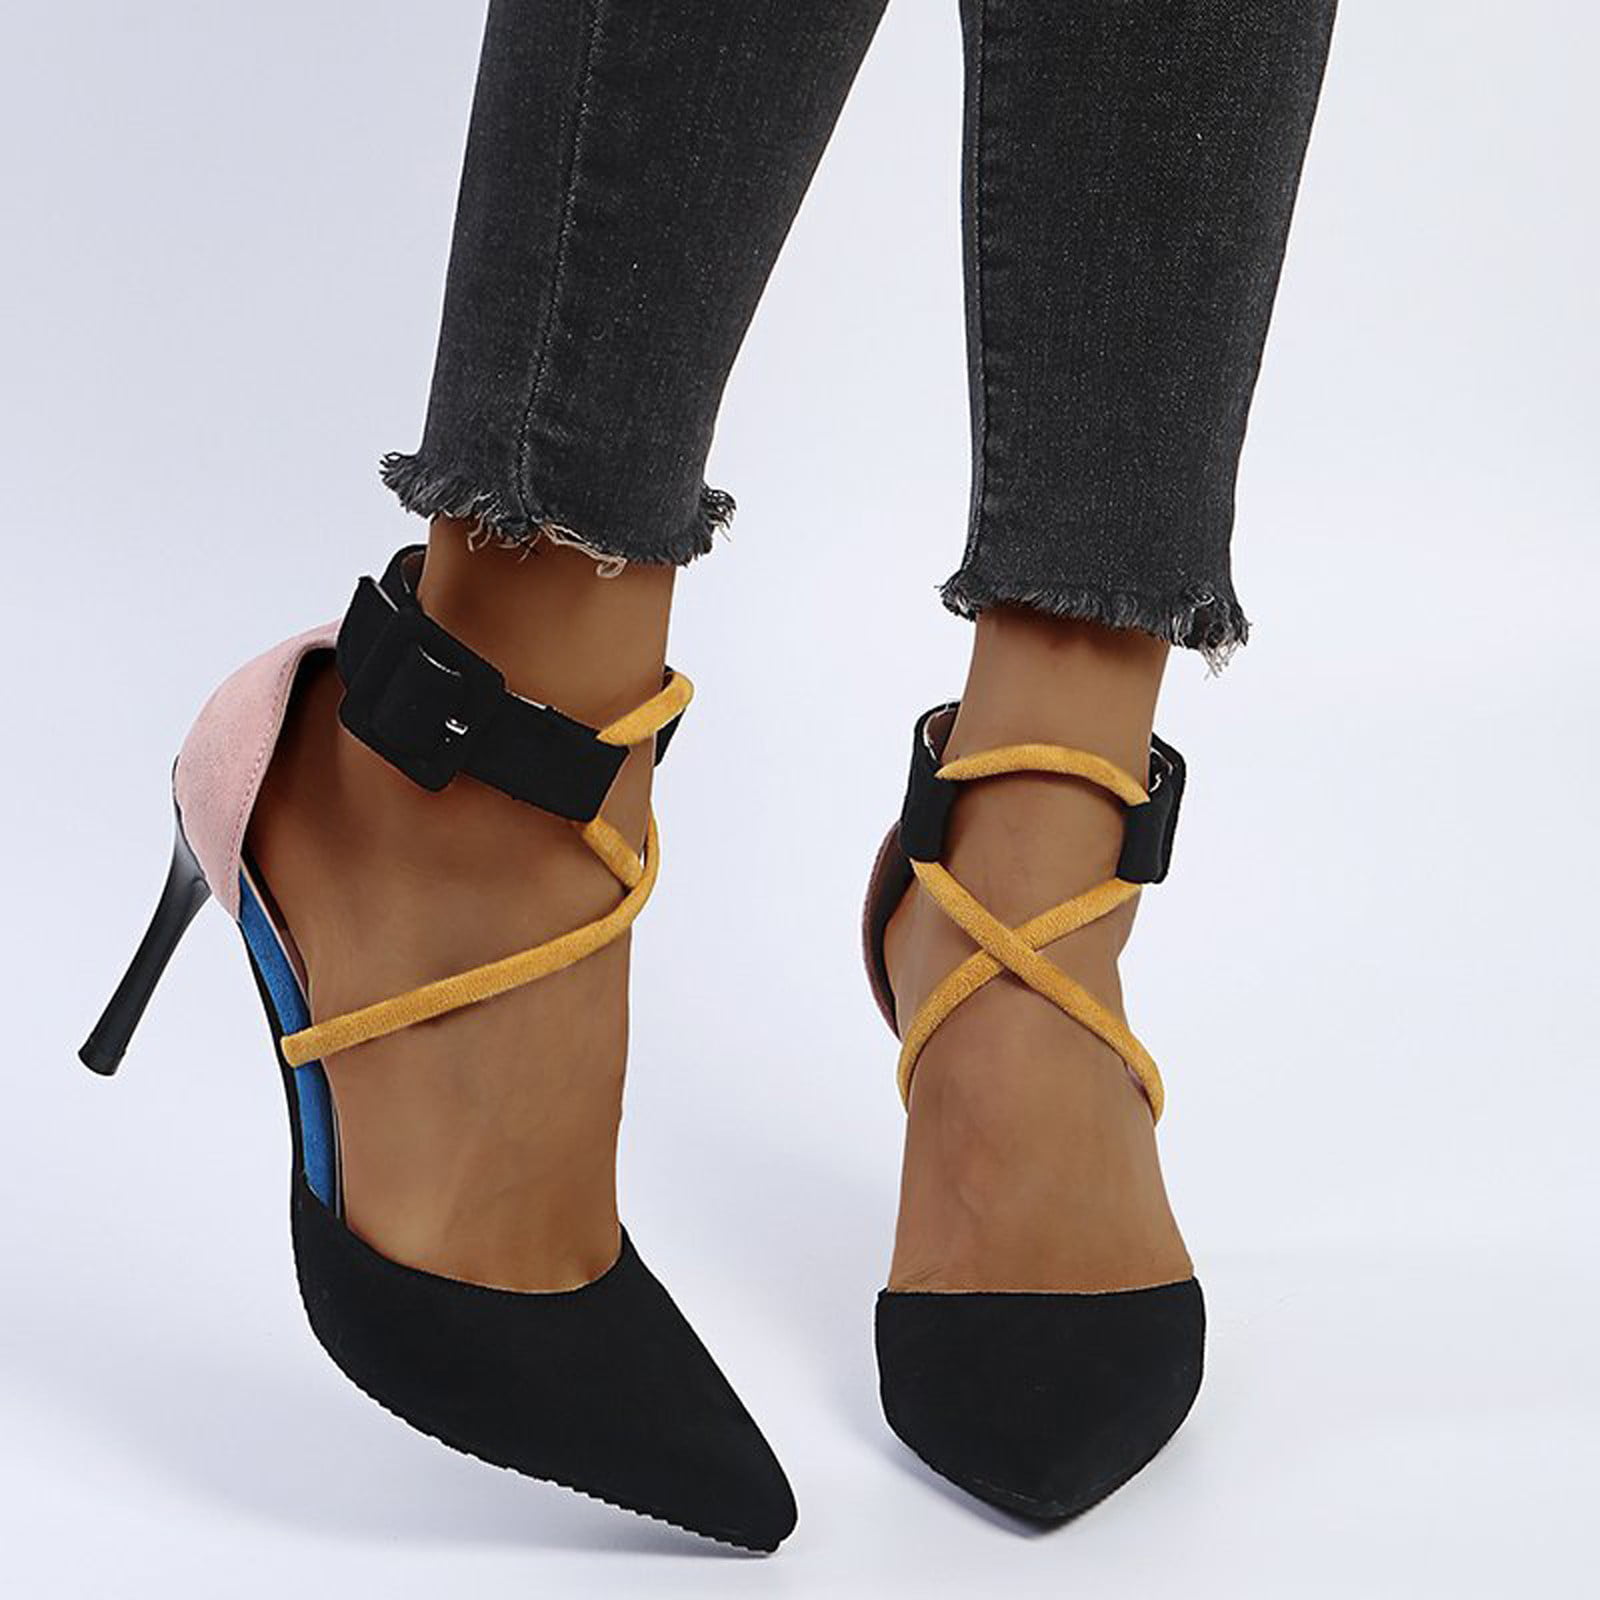 Aayomet Breathable High Strap Casual Women's Fashion Buckle Heels ...